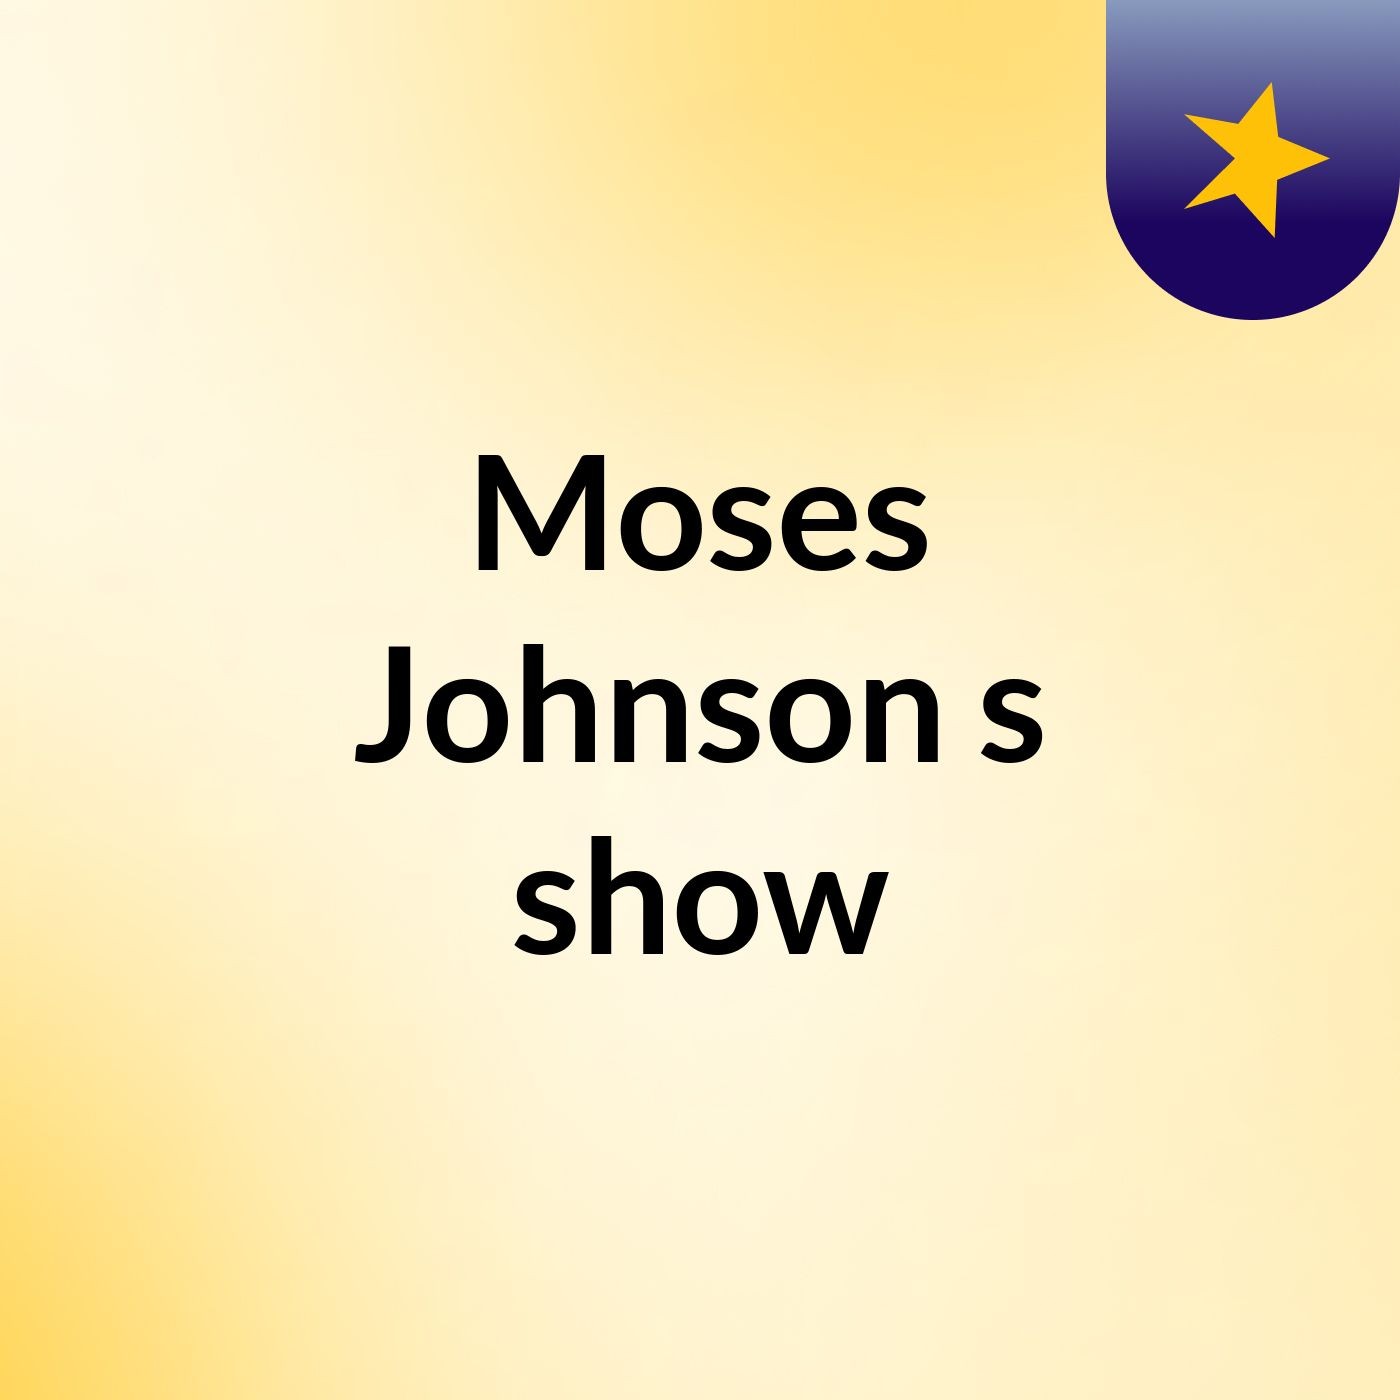 Moses Johnson's show